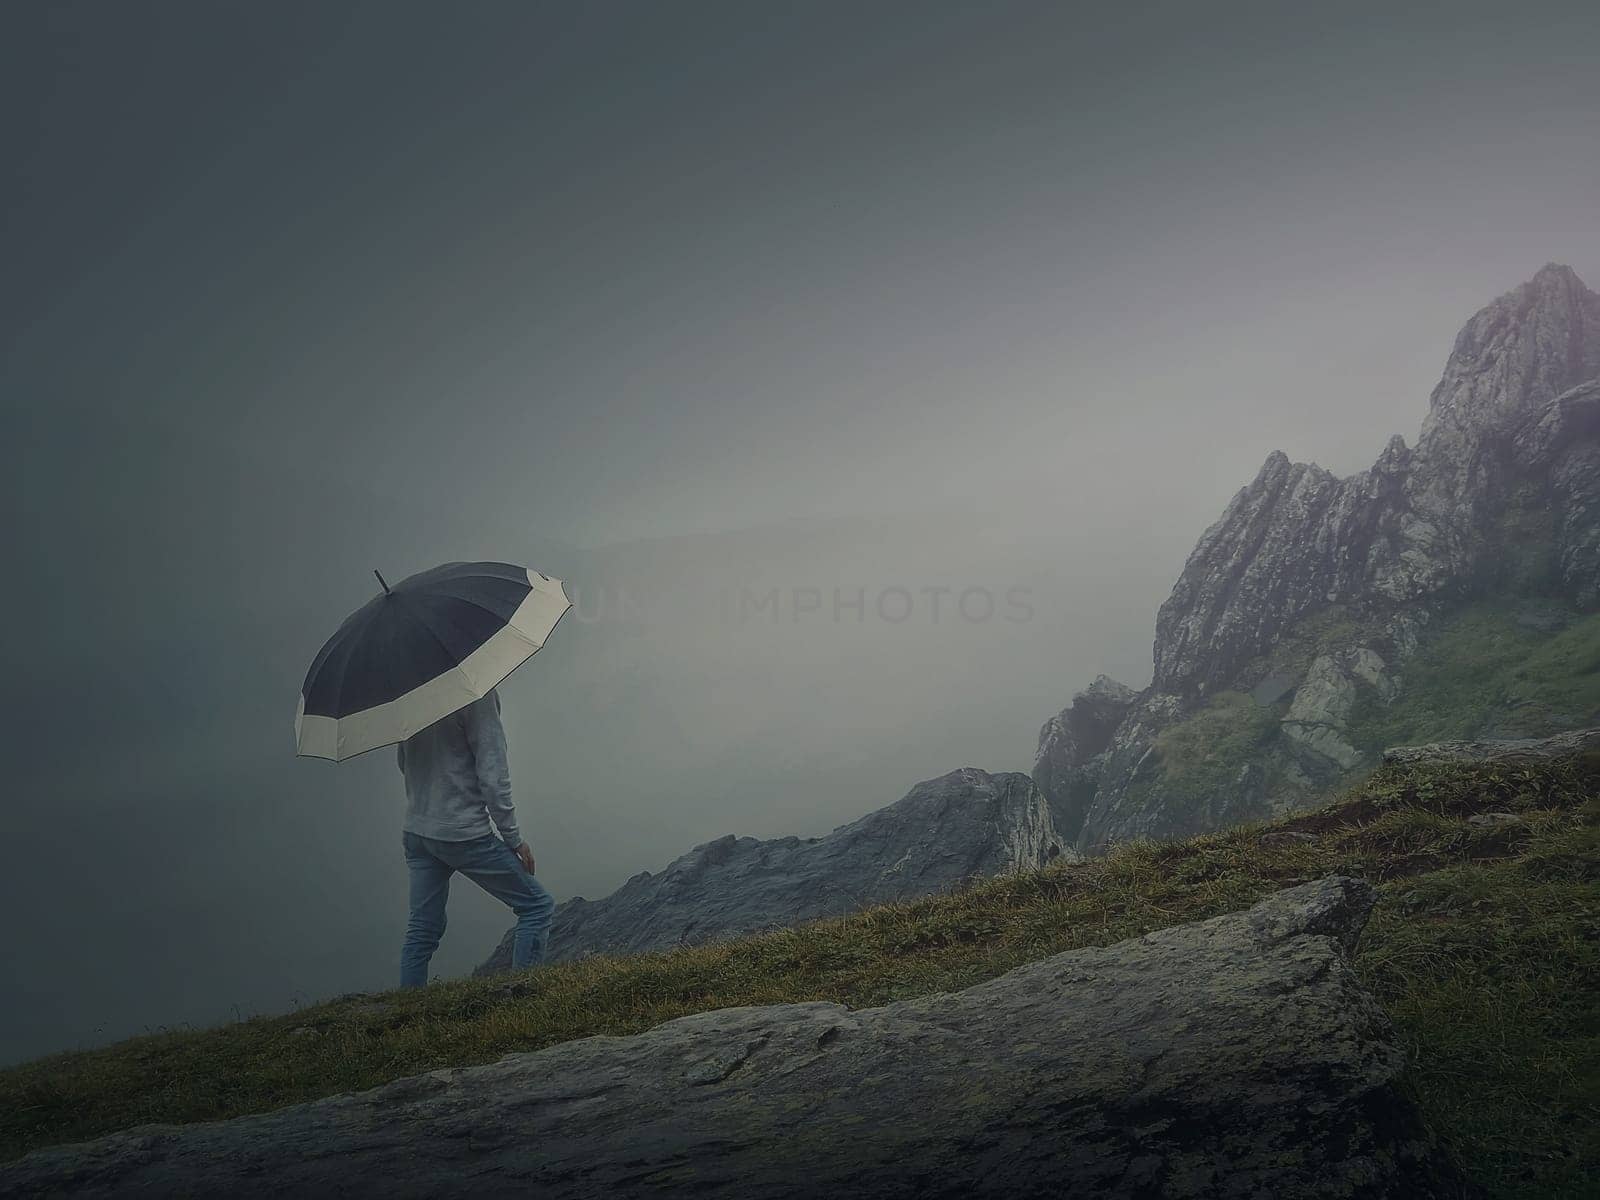 Lone person under umbrella in the foggy mountains